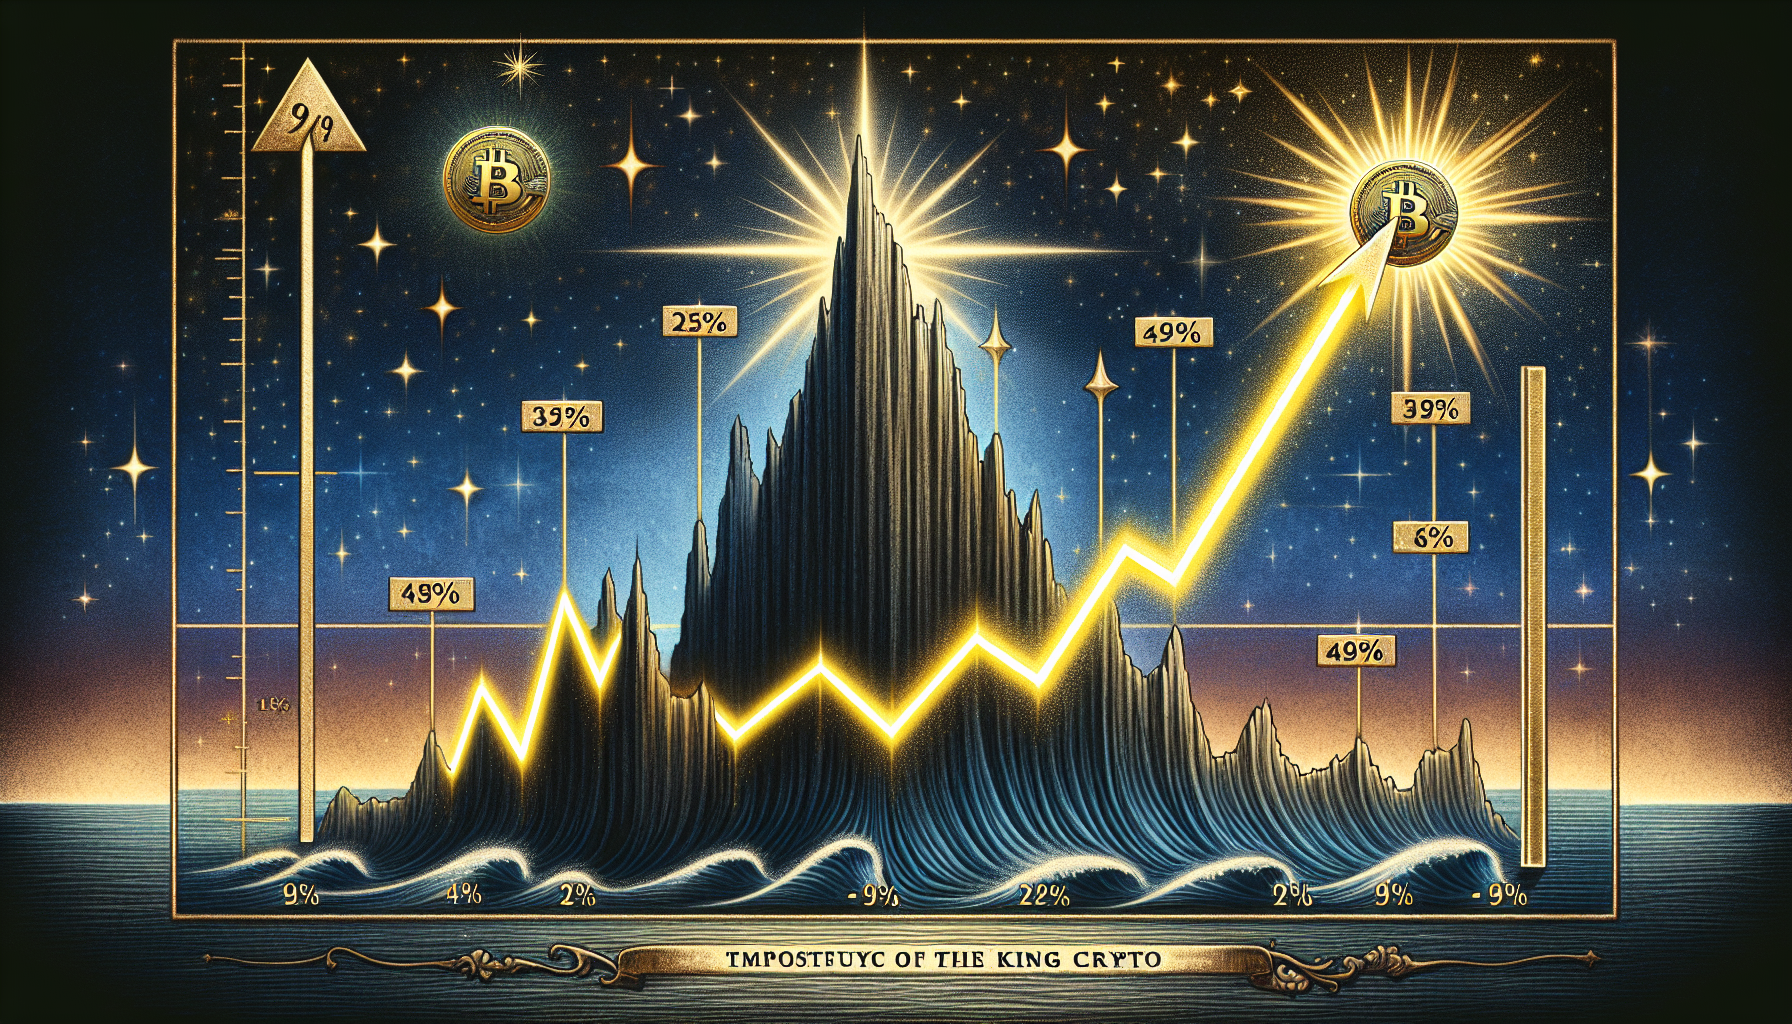 Historical performance chart of King Crypto